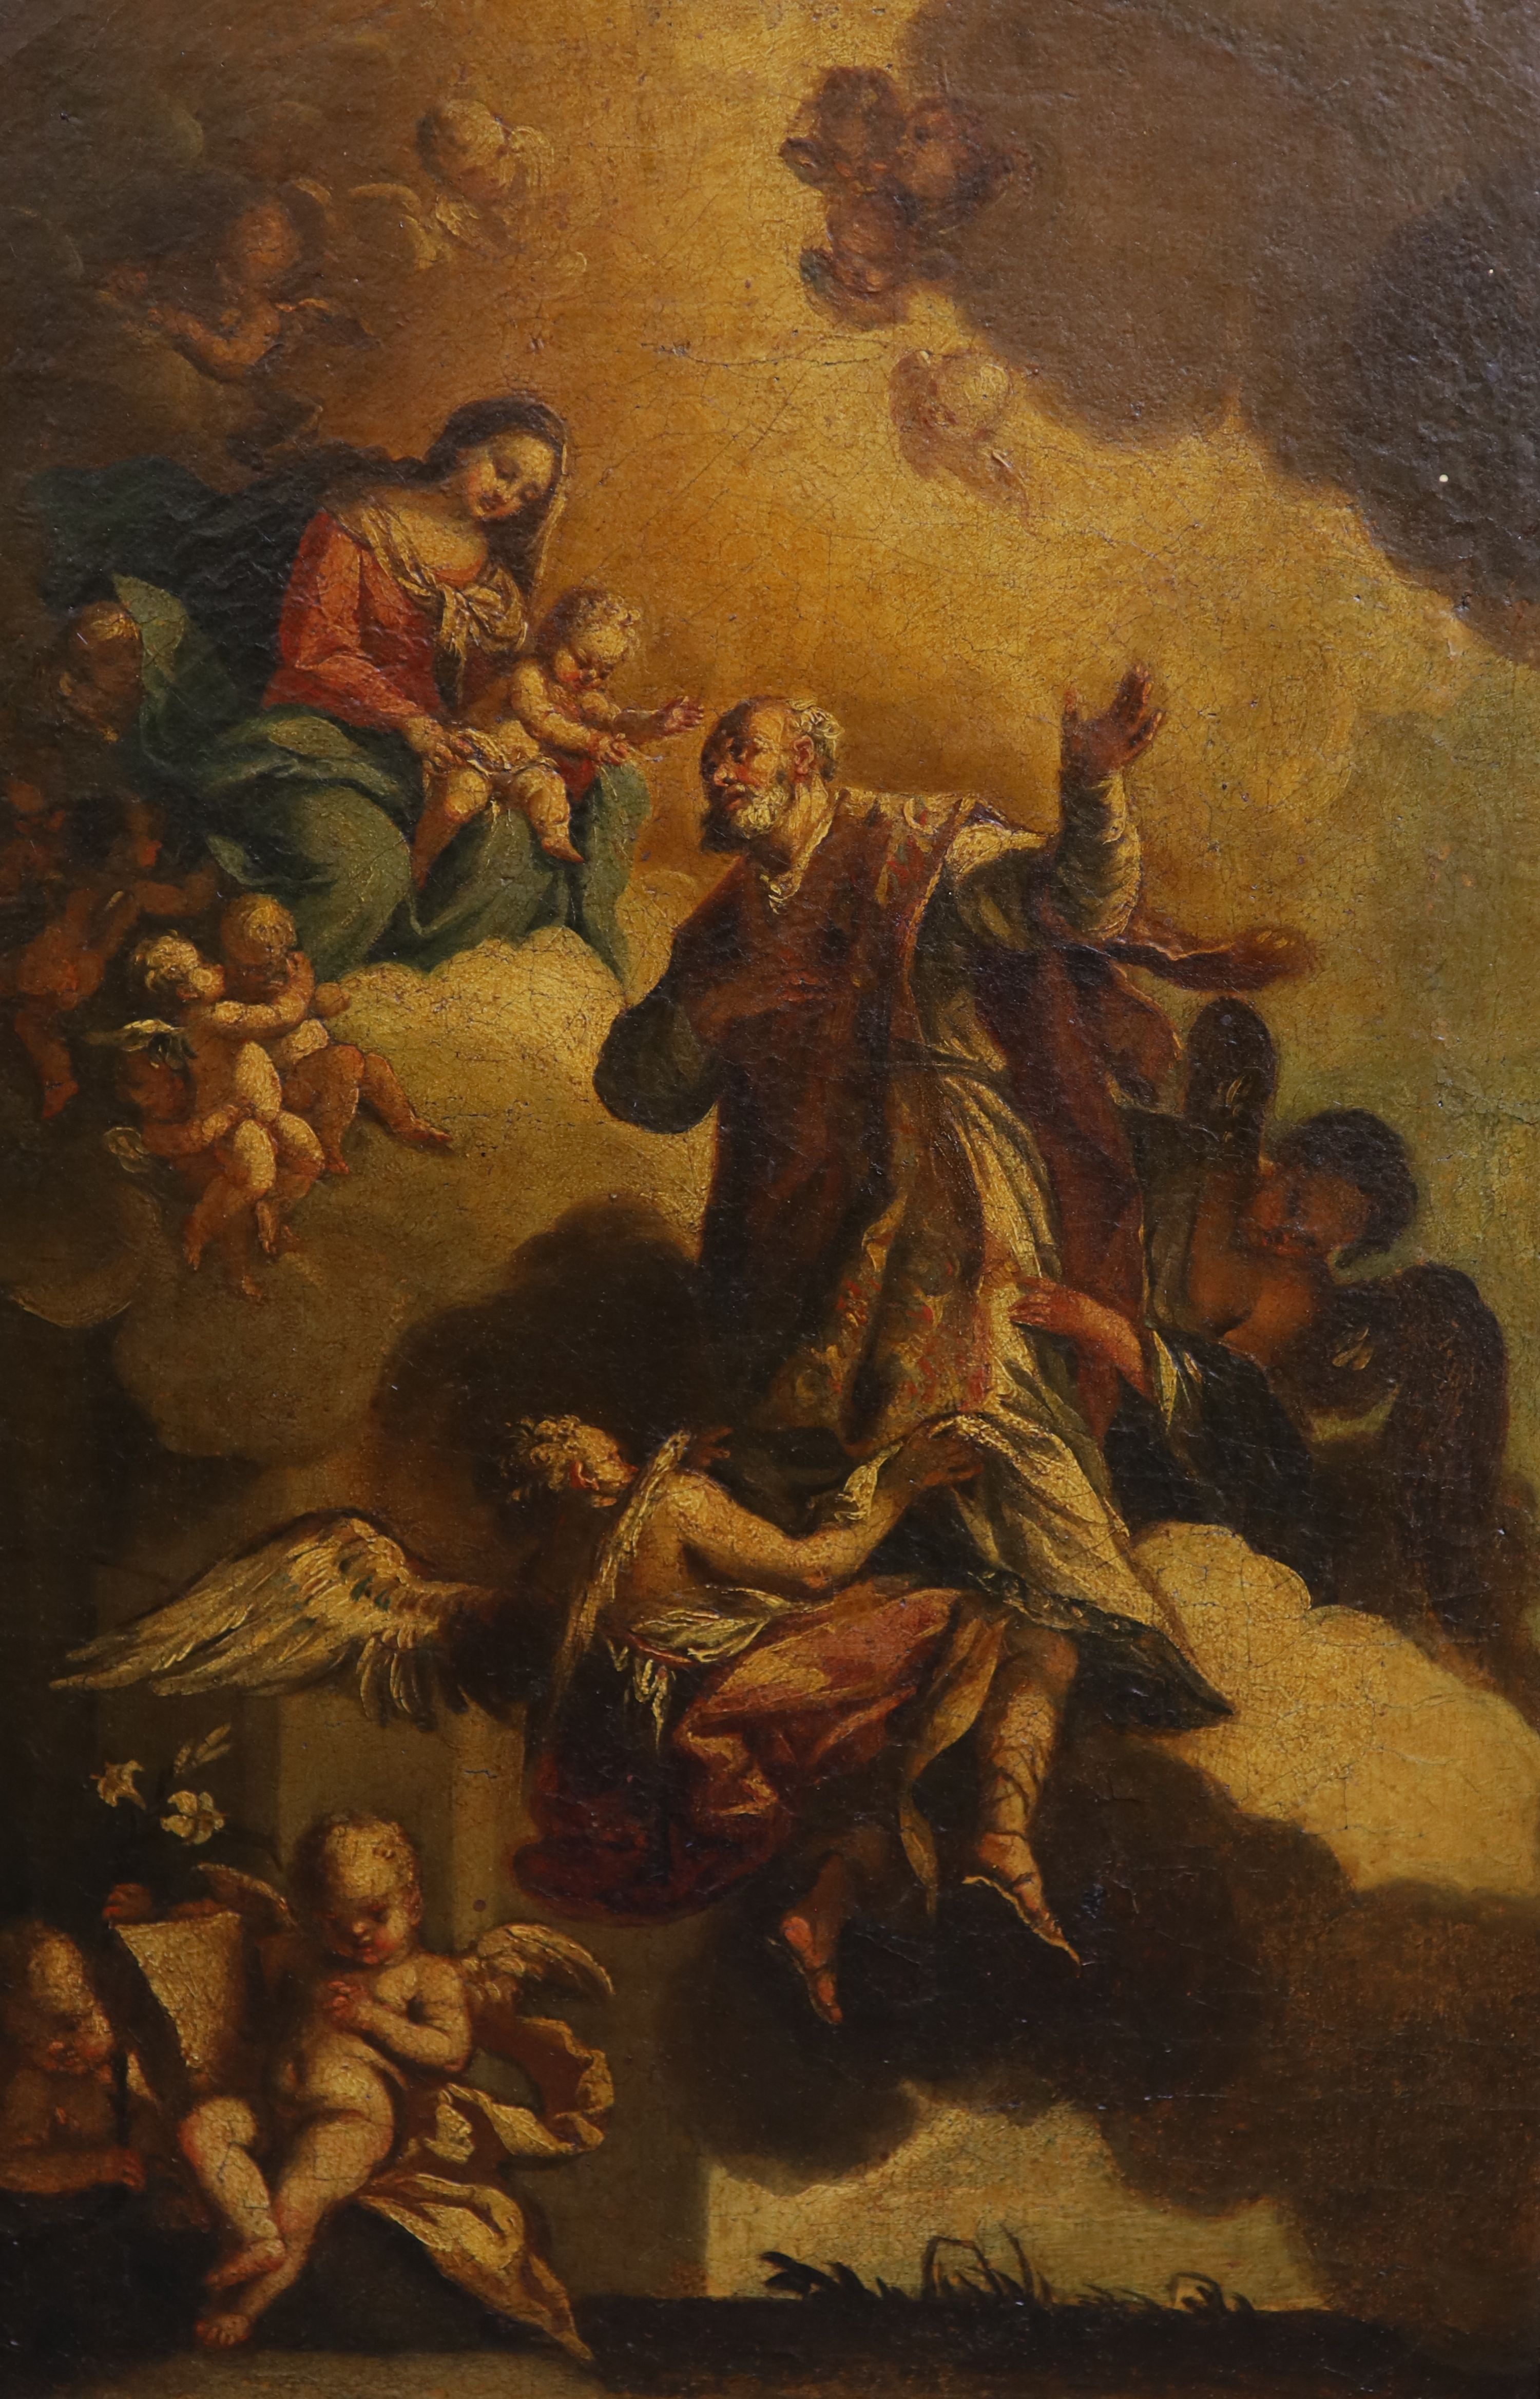 Follower of Sebastiano Ricci (1659-1734), The Apotheosis of a Saint before the Virgin and Child, Oil on canvas, 49 x 33 cm.